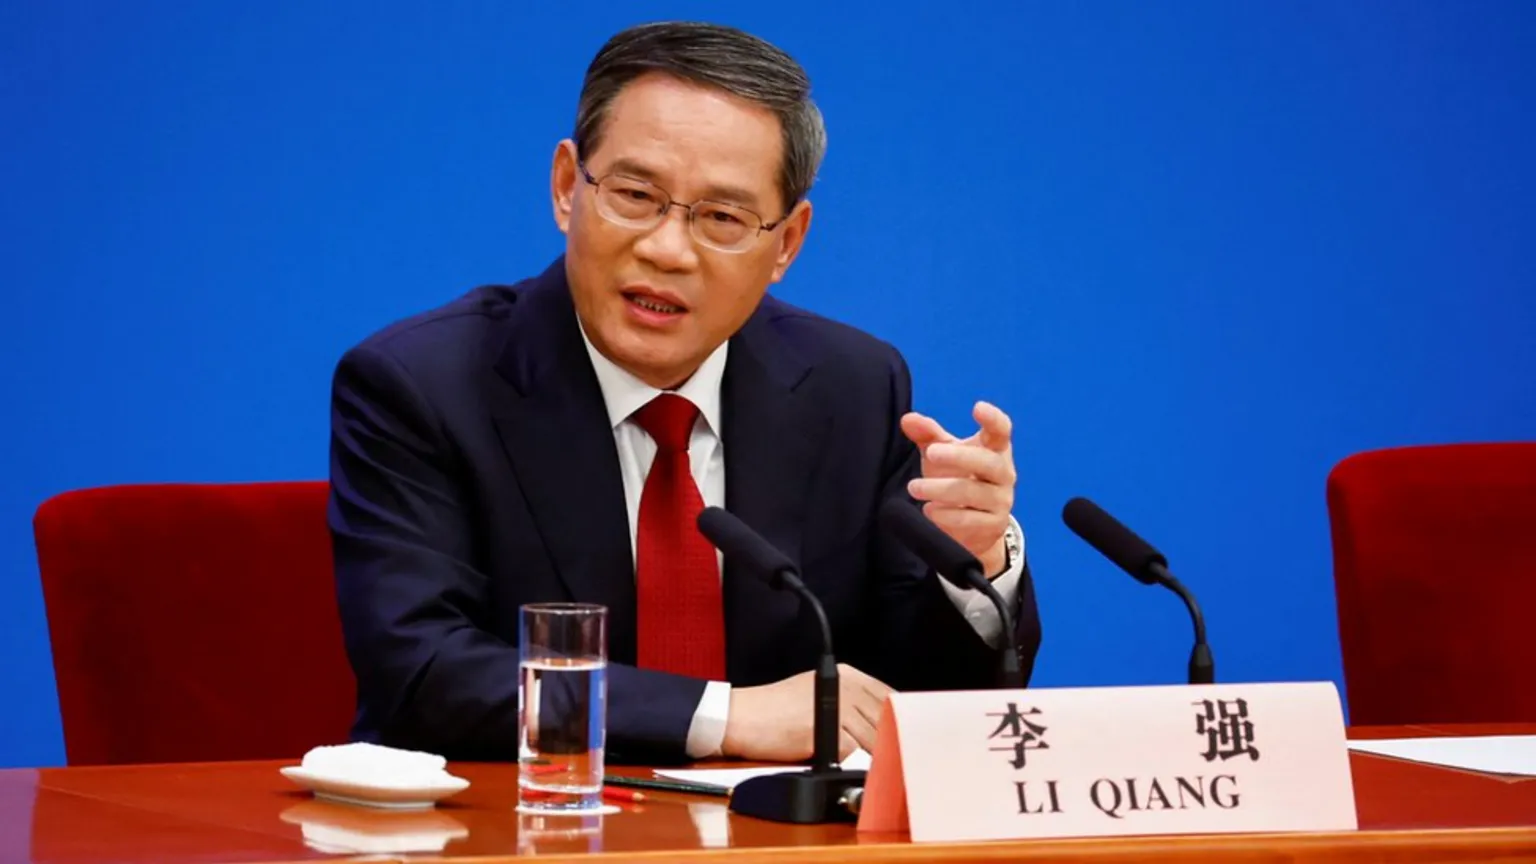 Chinese Premier Li Qiang to visit New Zealand later this week